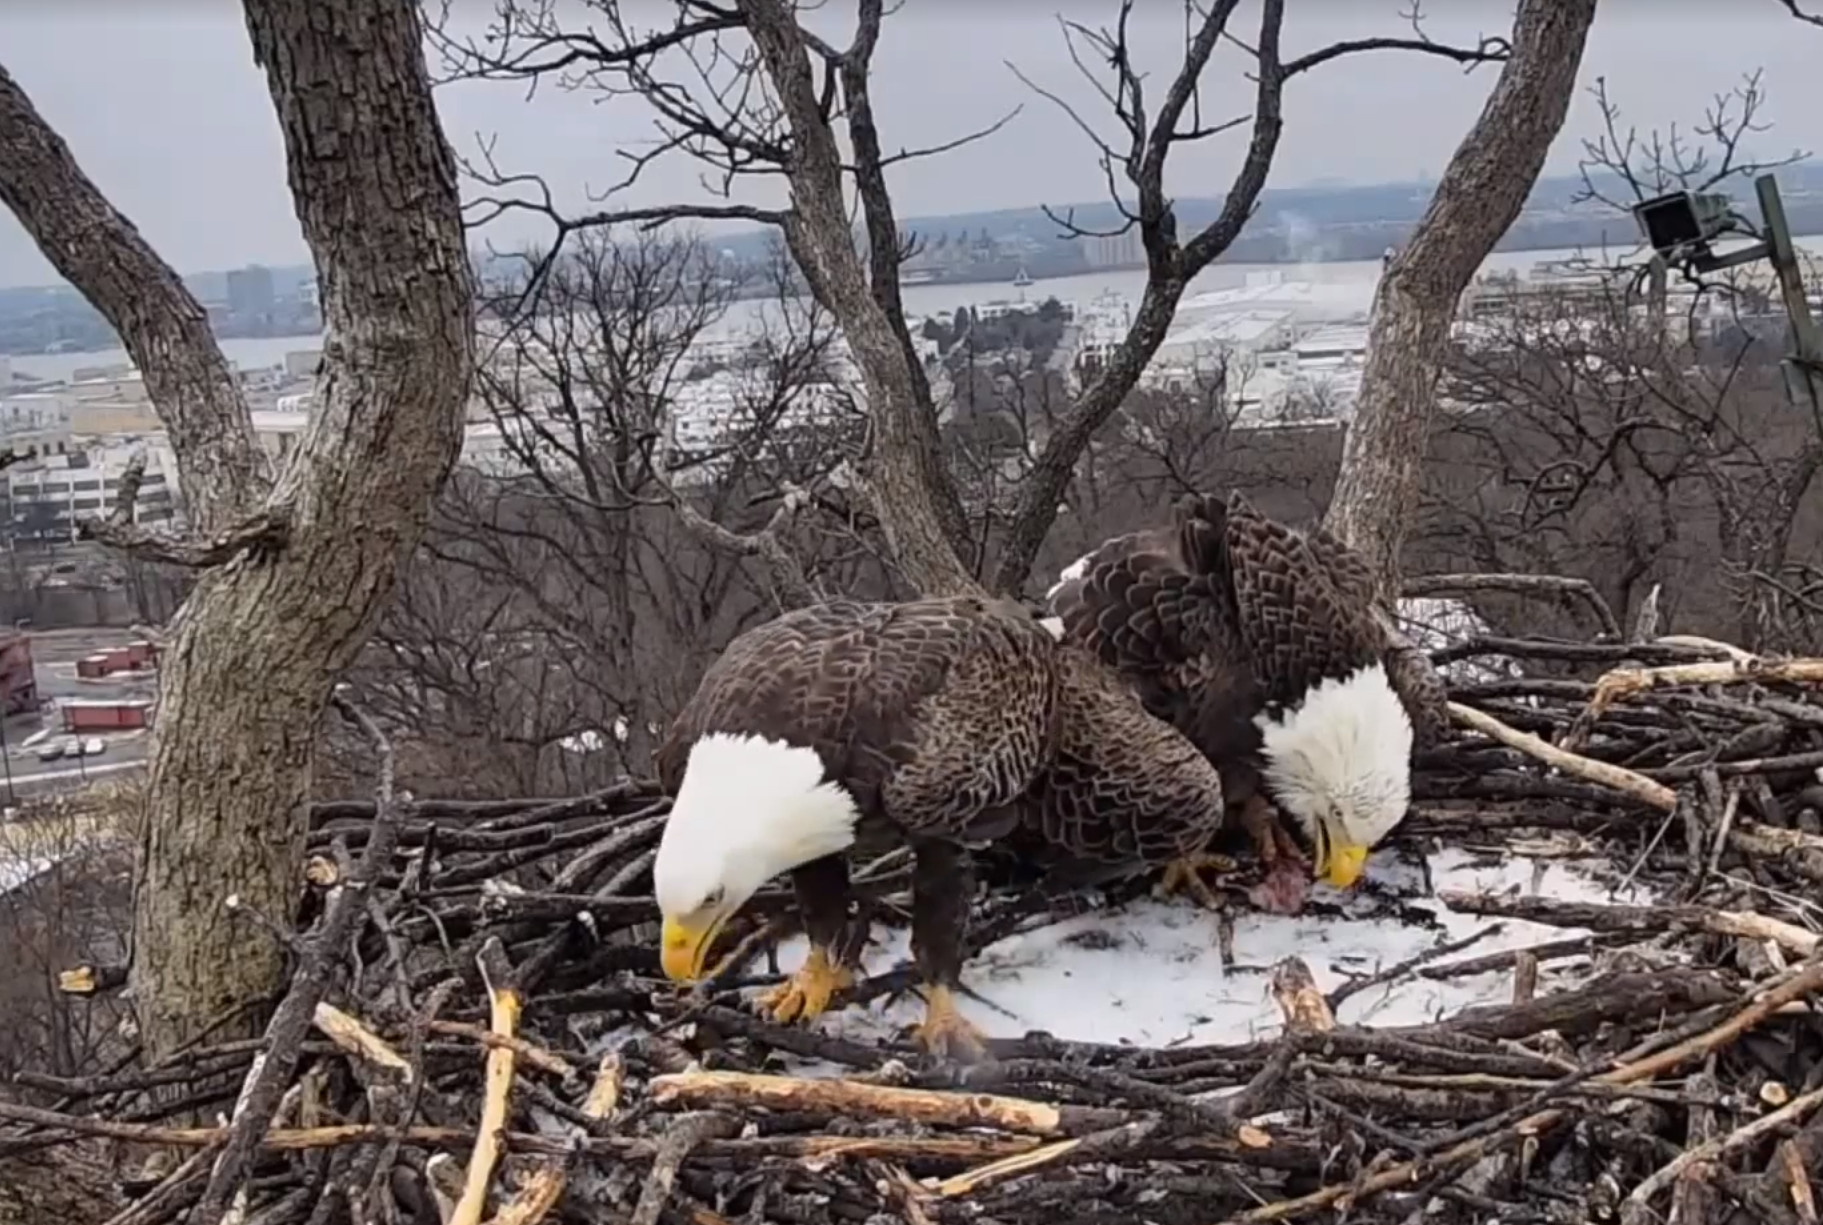 Justice (left) spruces up his nest while Liberty chows down on a fish. (Courtesy Earth Conservation Corps via Facebook)